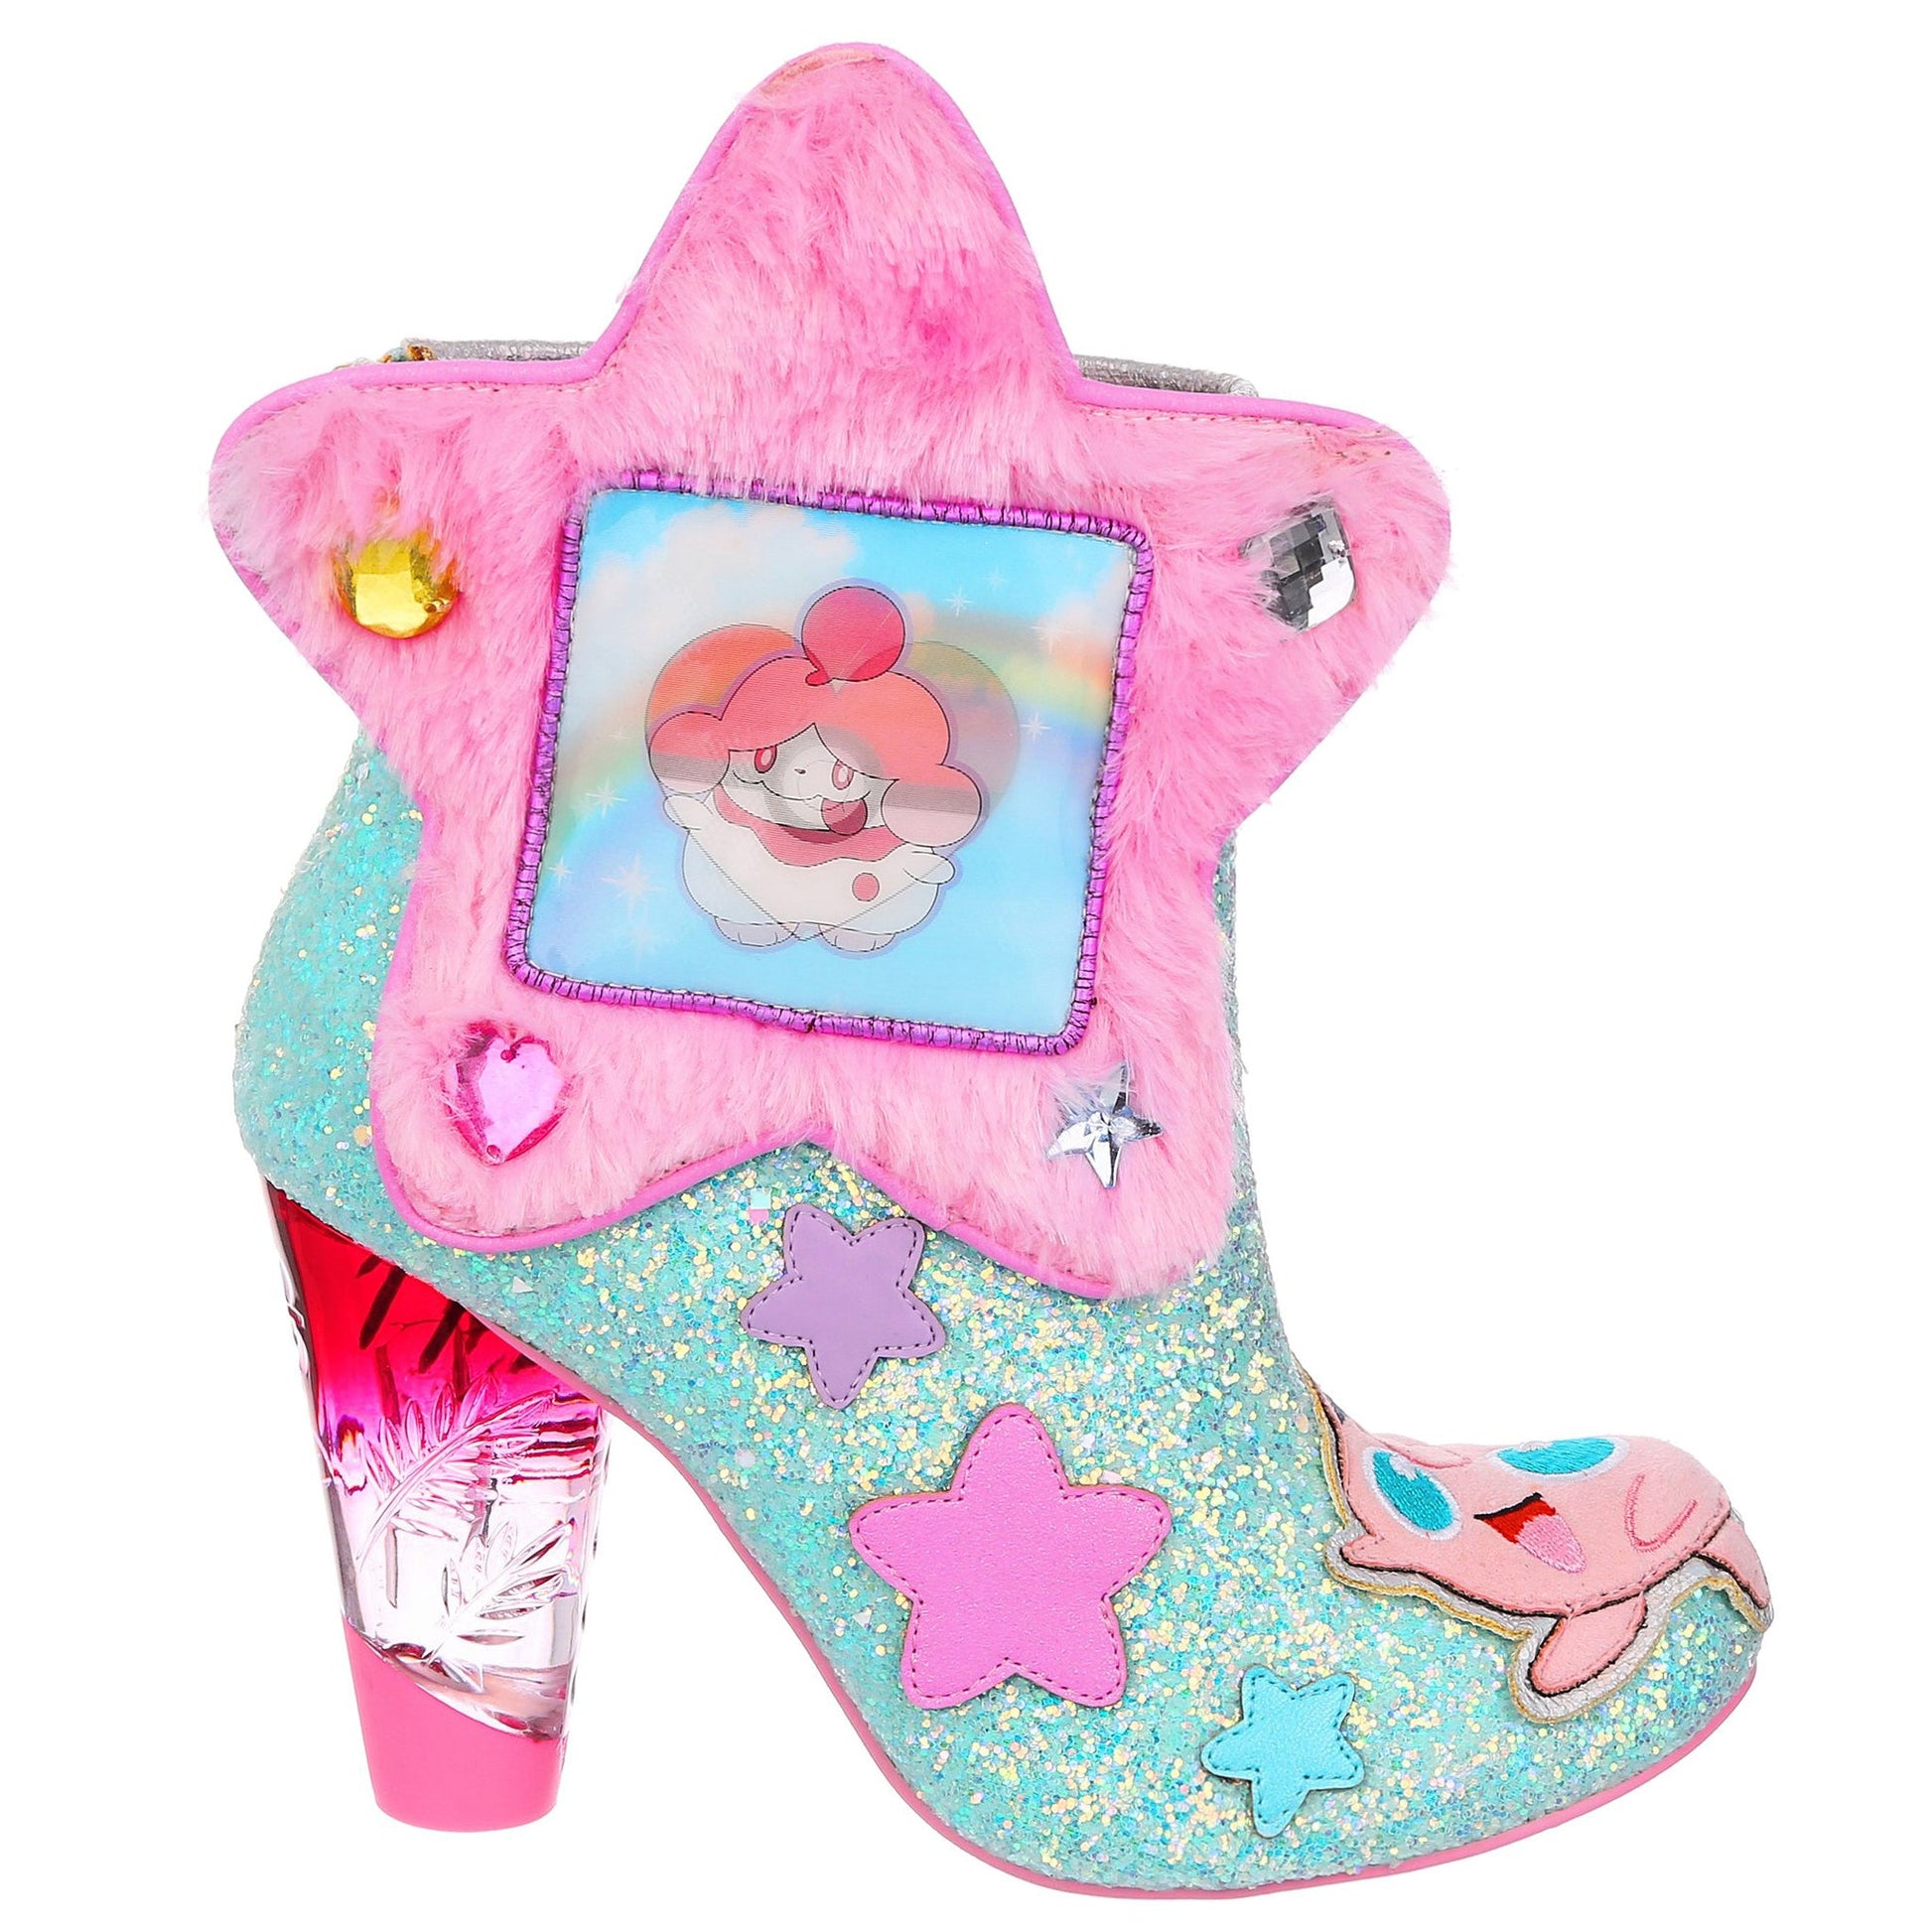 Twinkle Toes - Rockamilly-Shoes-Vintage